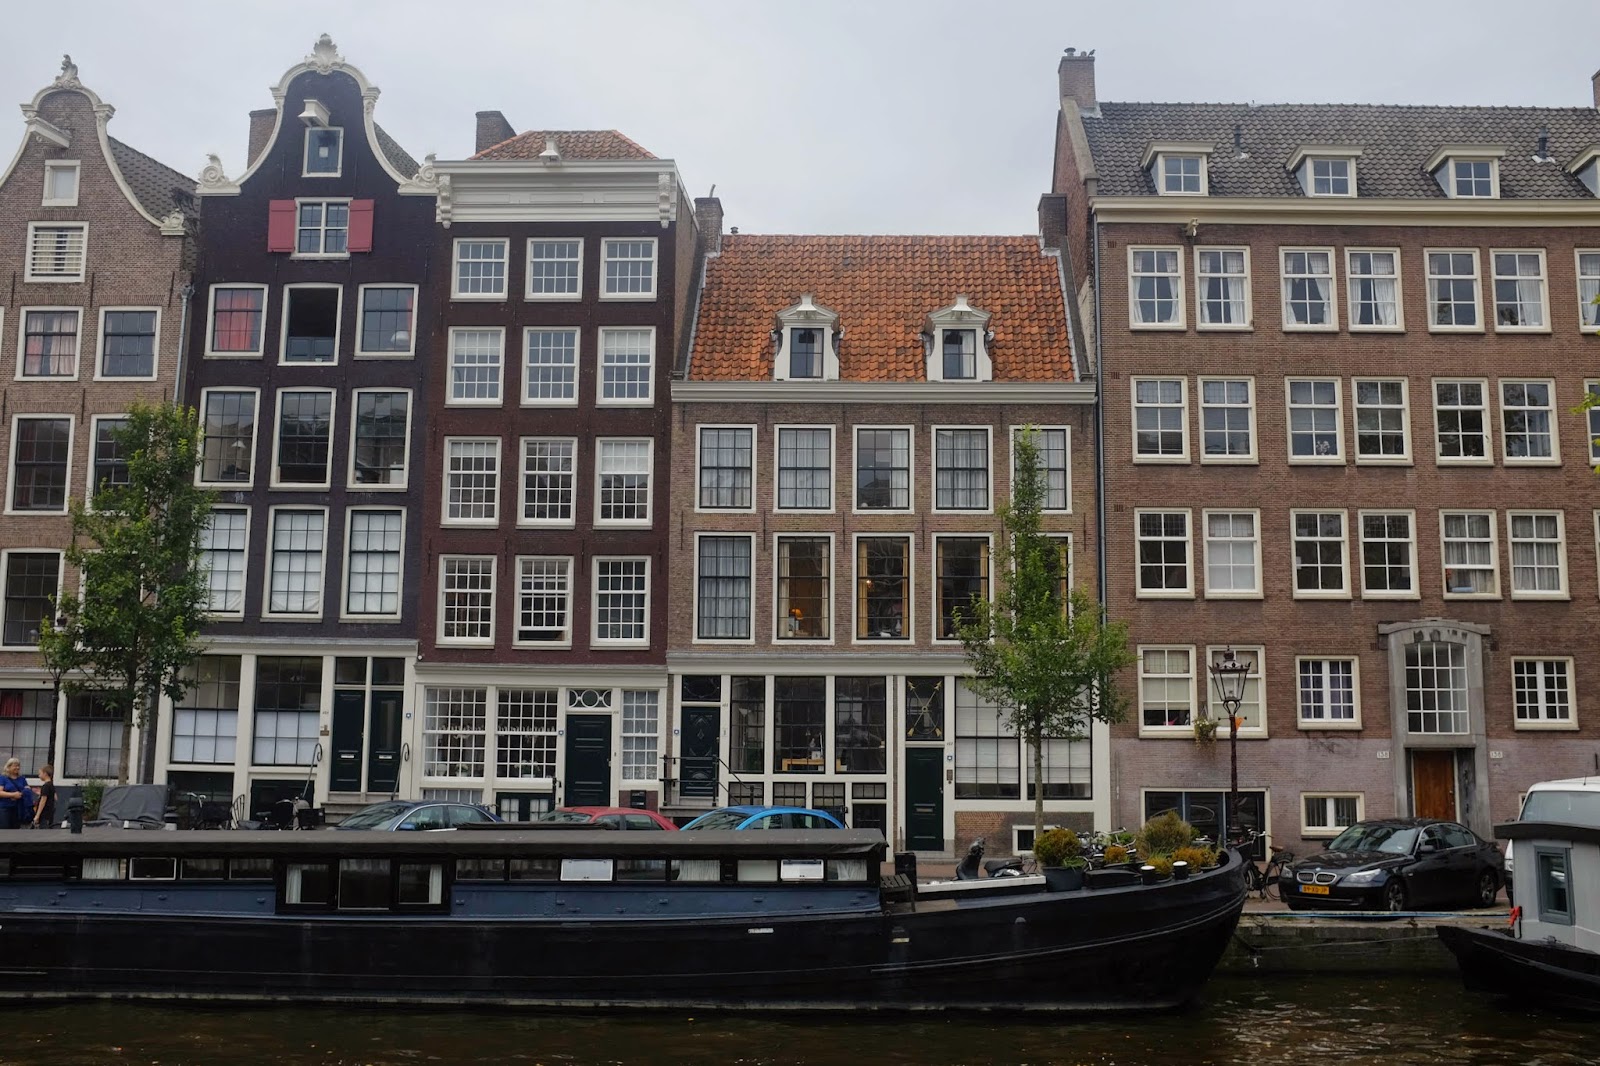 Canals of Amsterdam house architecture